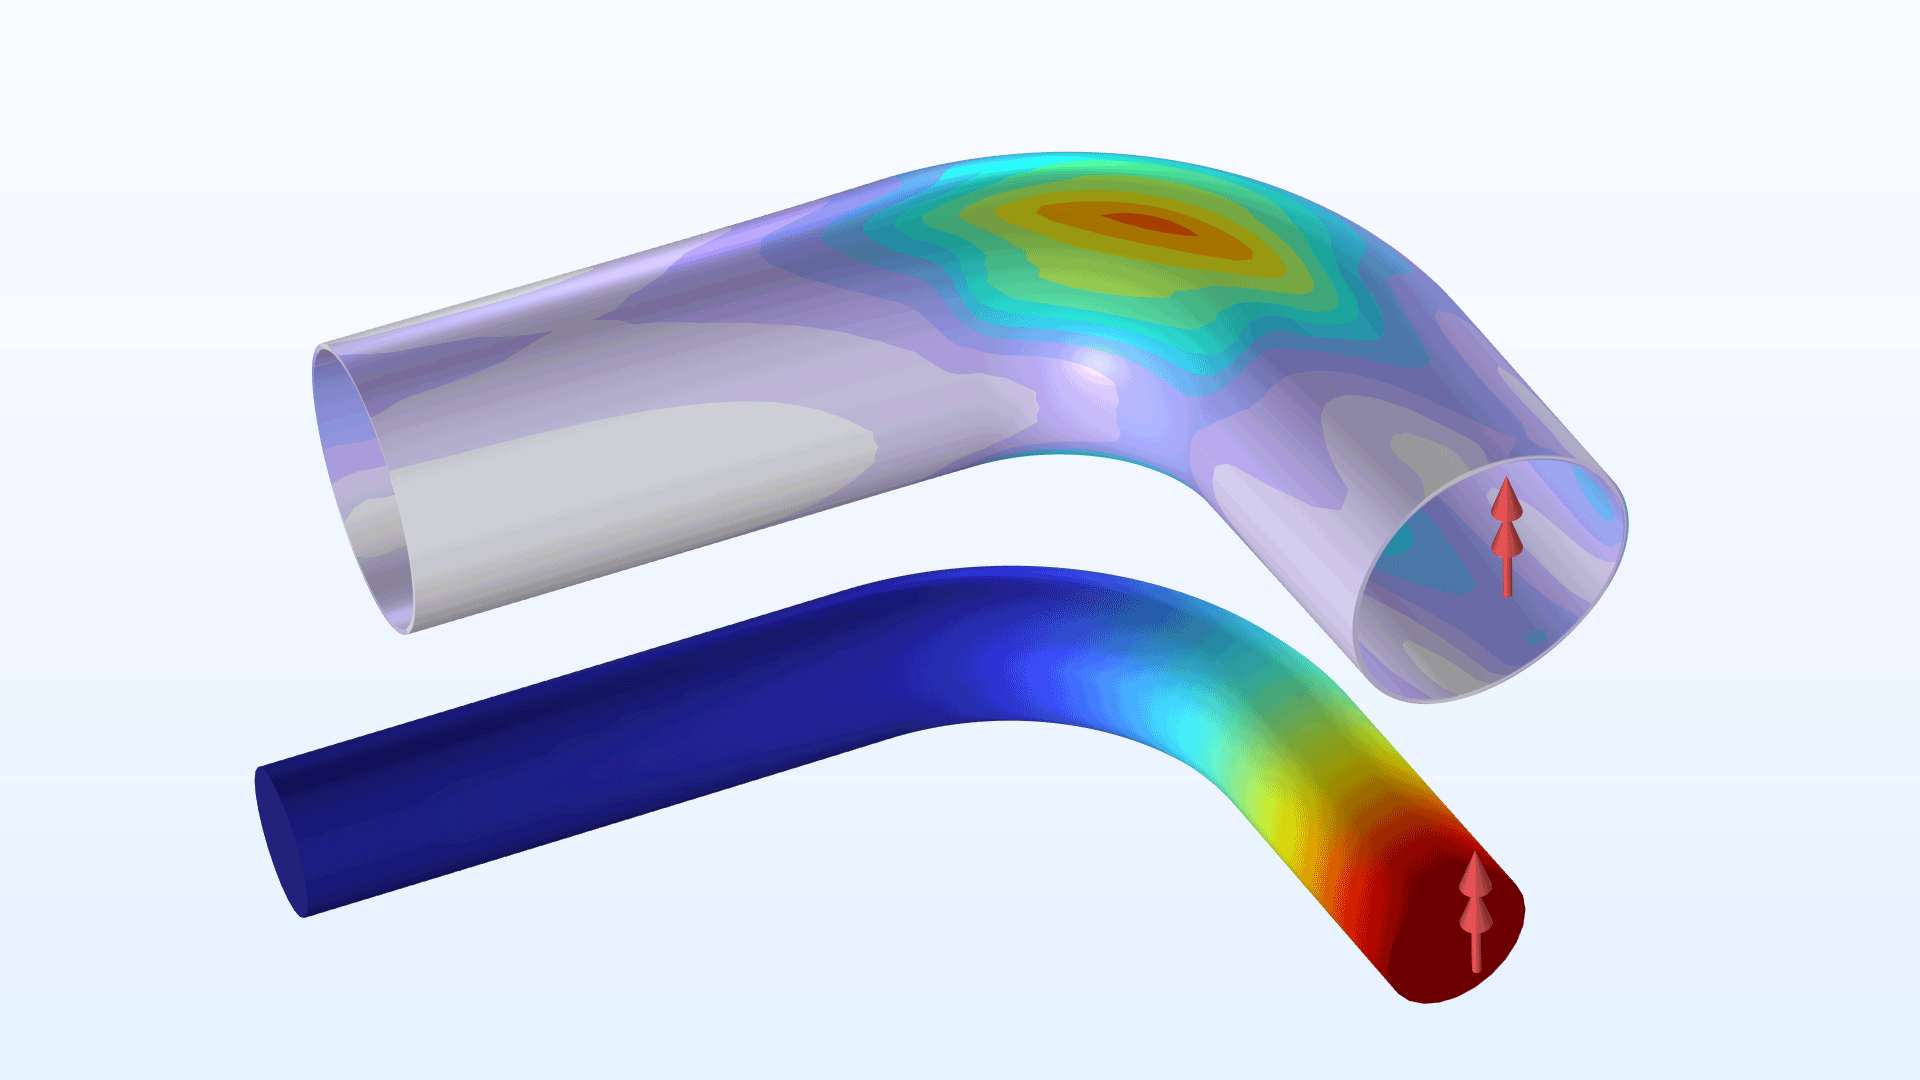 Two pipe bend models showing the stress in the Prism color table and displacement in the Rainbow color table.